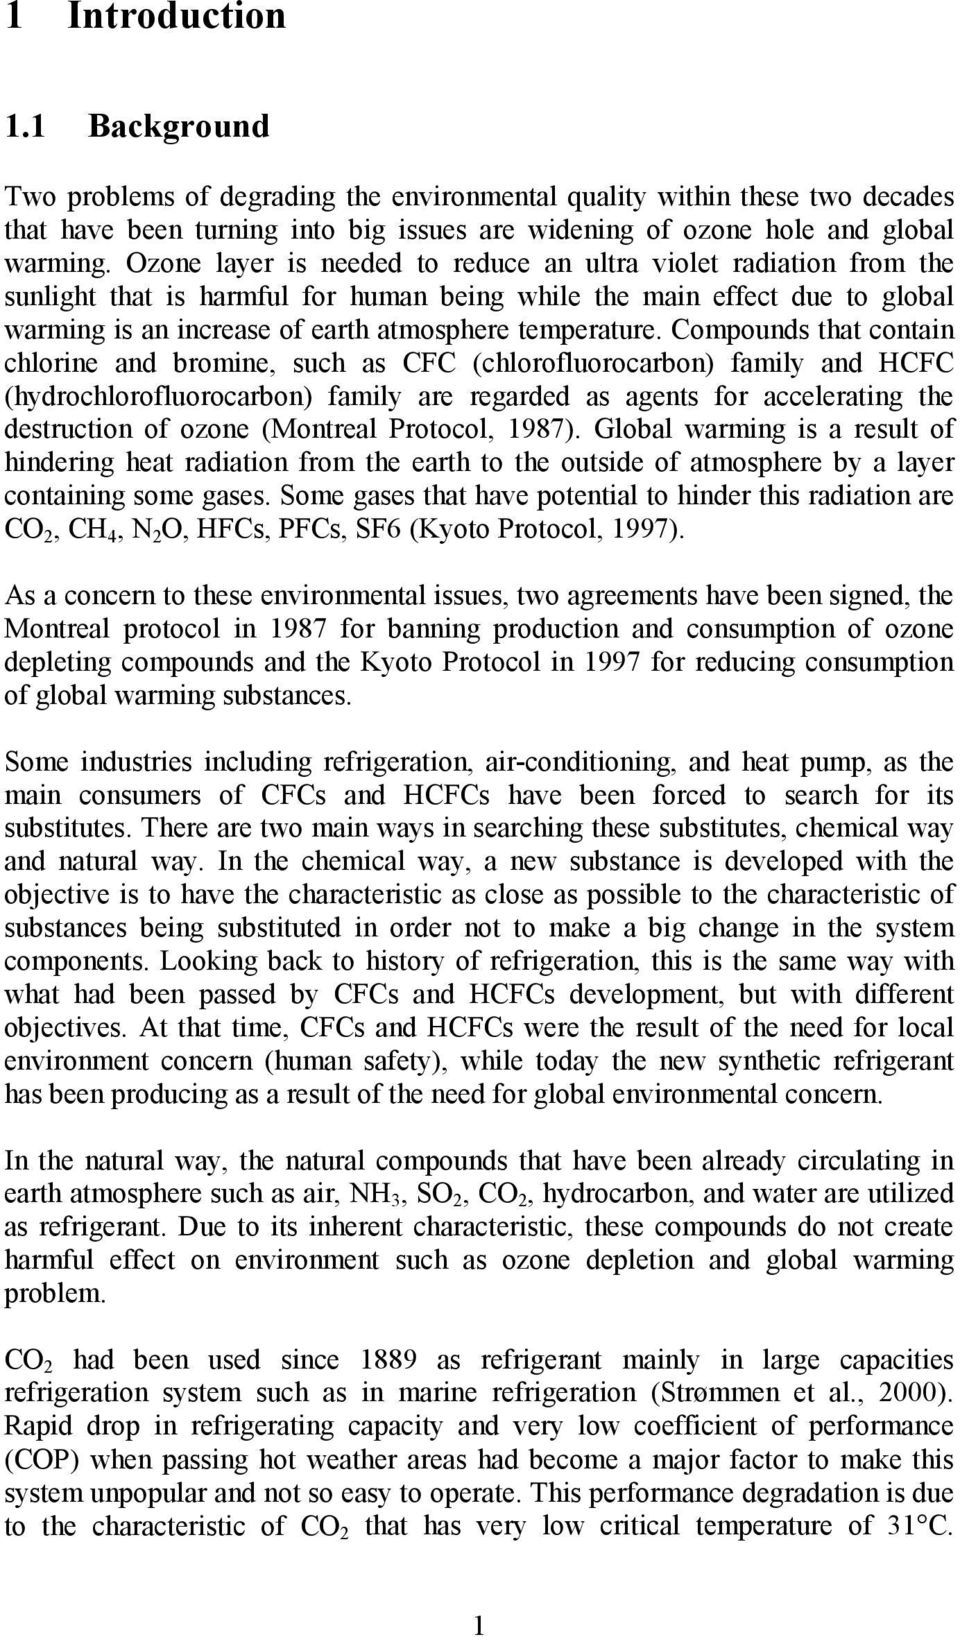 Compounds that contain chlorine and bromine, such as CFC (chlorofluorocarbon) family and HCFC (hydrochlorofluorocarbon) family are regarded as agents for accelerating the destruction of ozone